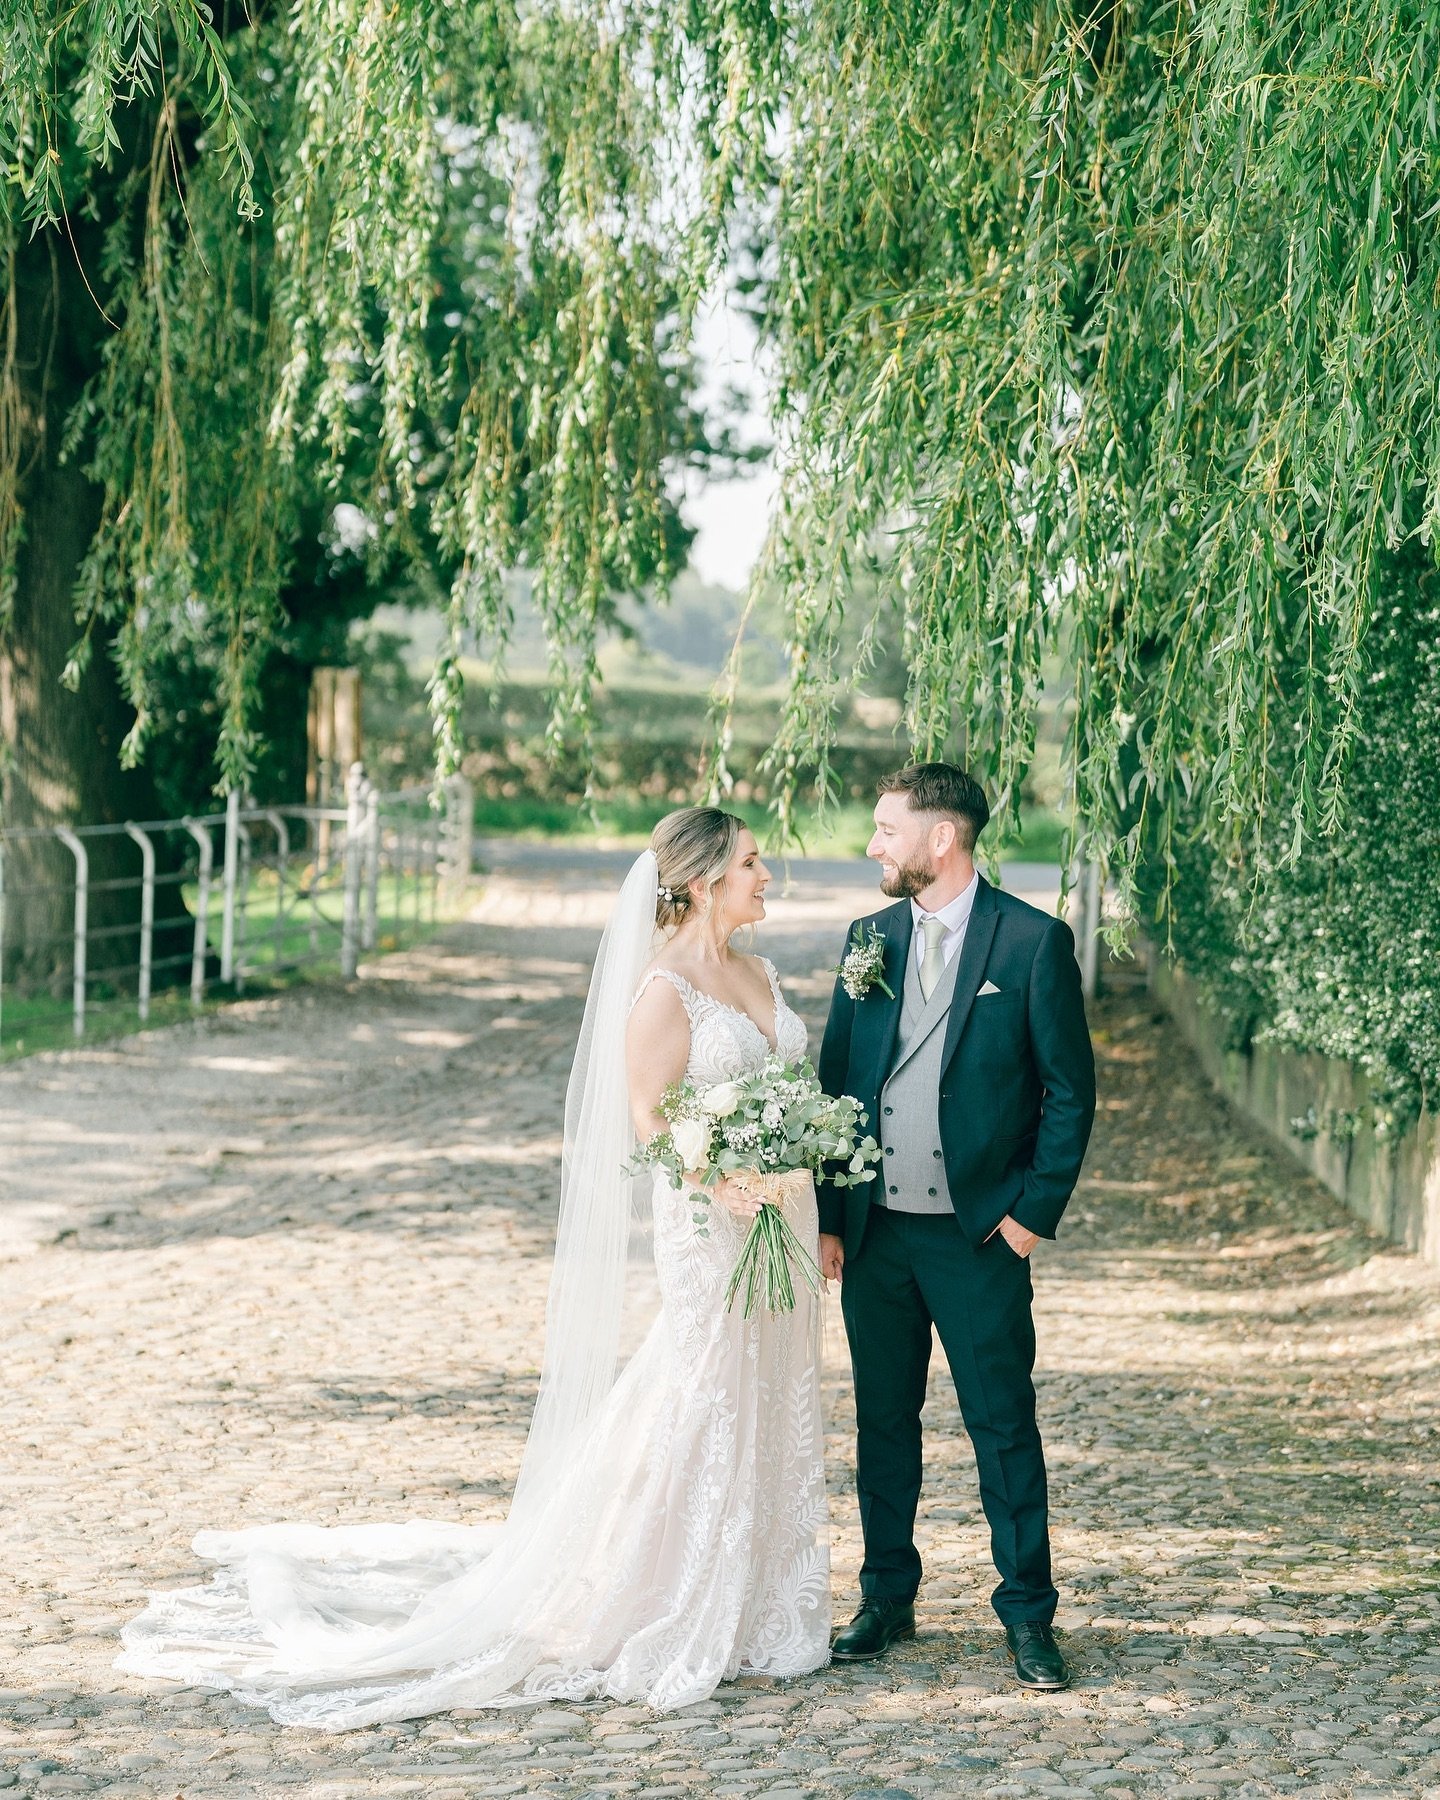 Last year at @stockfarmbarn with S &amp; R ✨

It occurred to me recently that I&rsquo;ve NEVER shared the wonderful @soph_grimshaw &amp; @ry_gshaw&rsquo;s wedding on here 🤯 and I just knew that I had to change that!! 

The most wonderful day! Still 